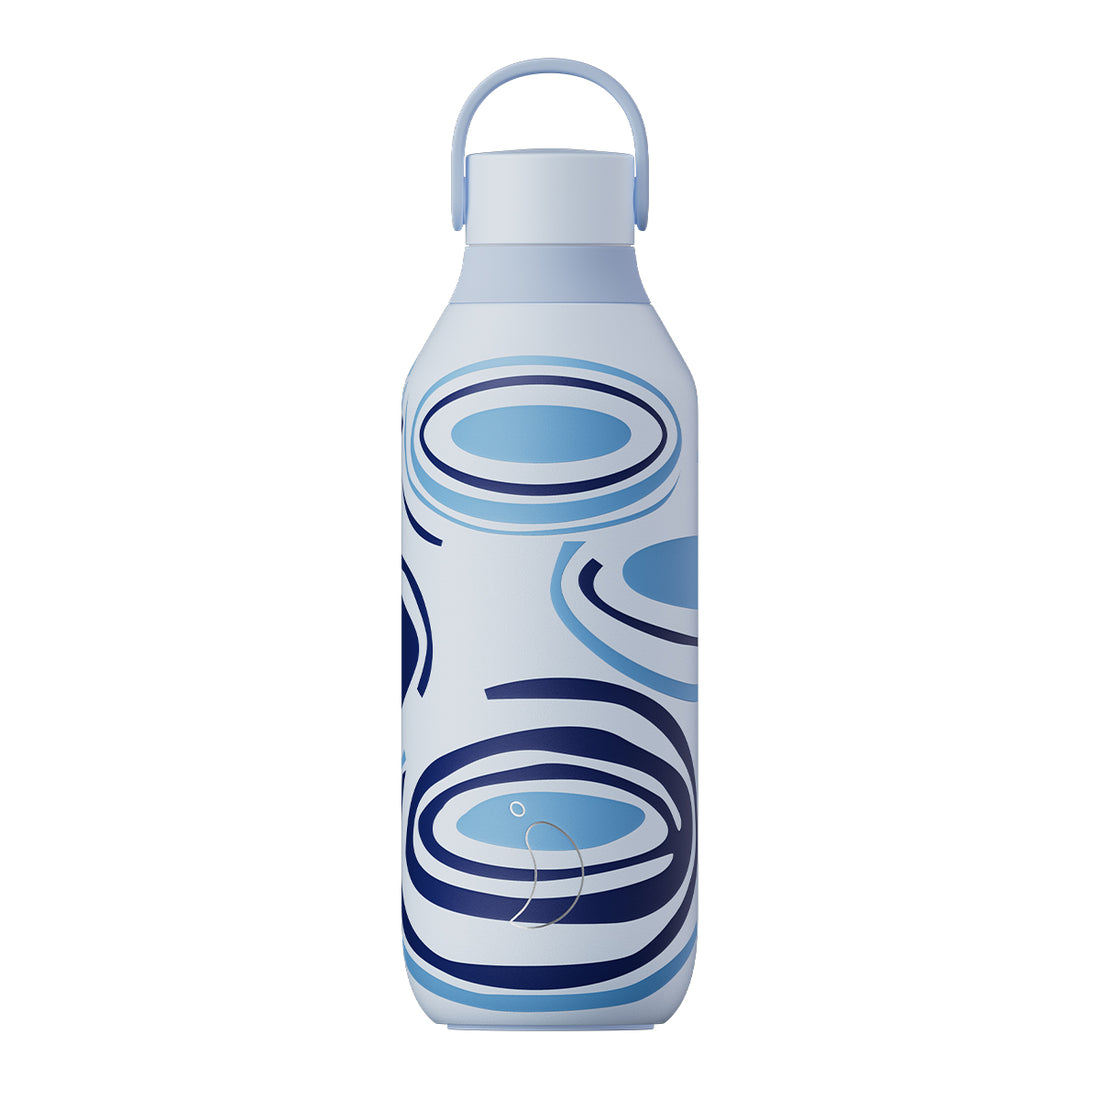 Chilly's 500ml Series 2 Stainless Steel Water Bottle - Granite